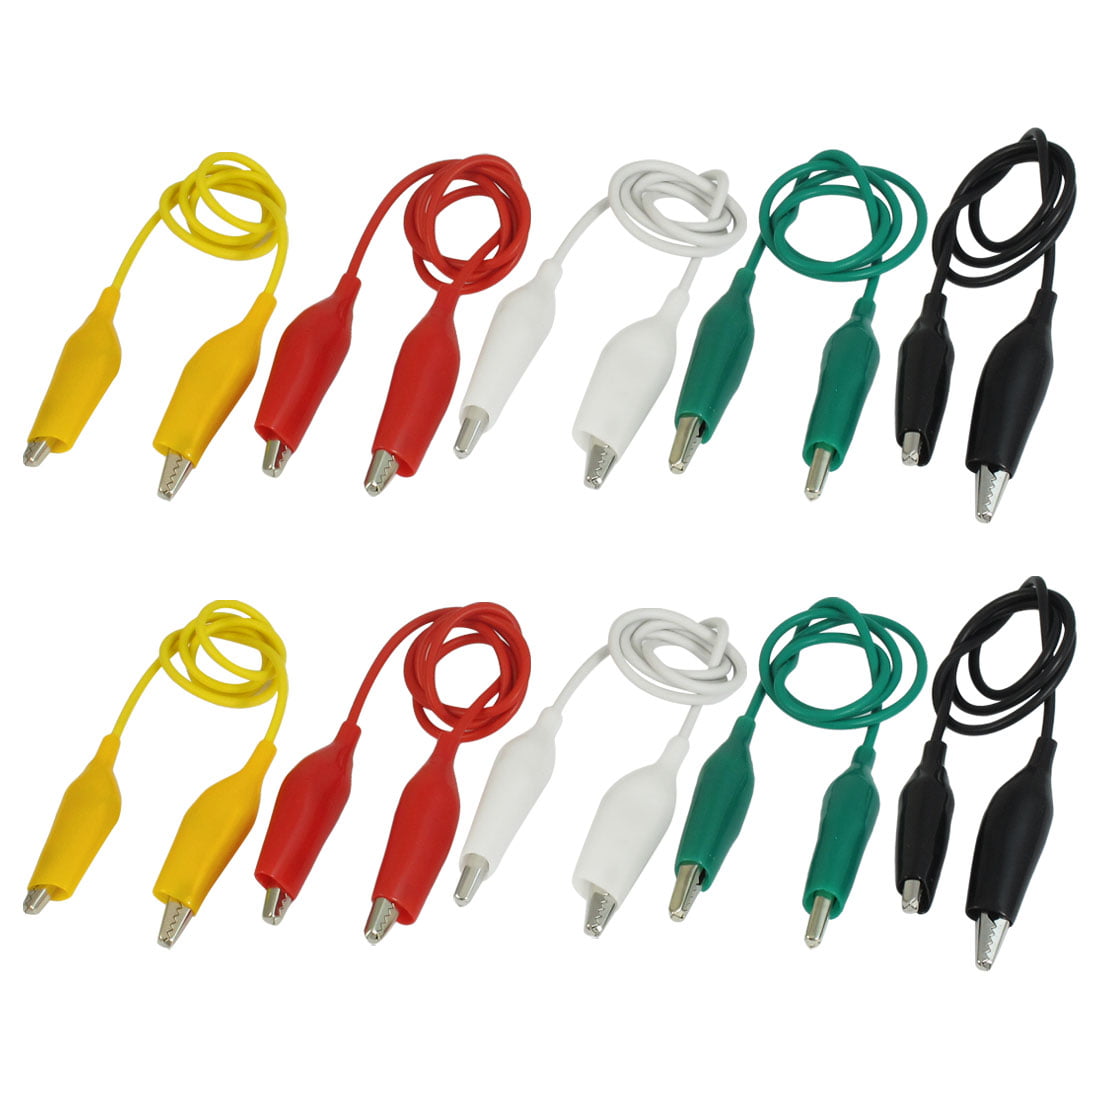 10 Pcs Crocodile Clips Cable Double-ended Alligator Jumper Test Leads Wire 50cm 